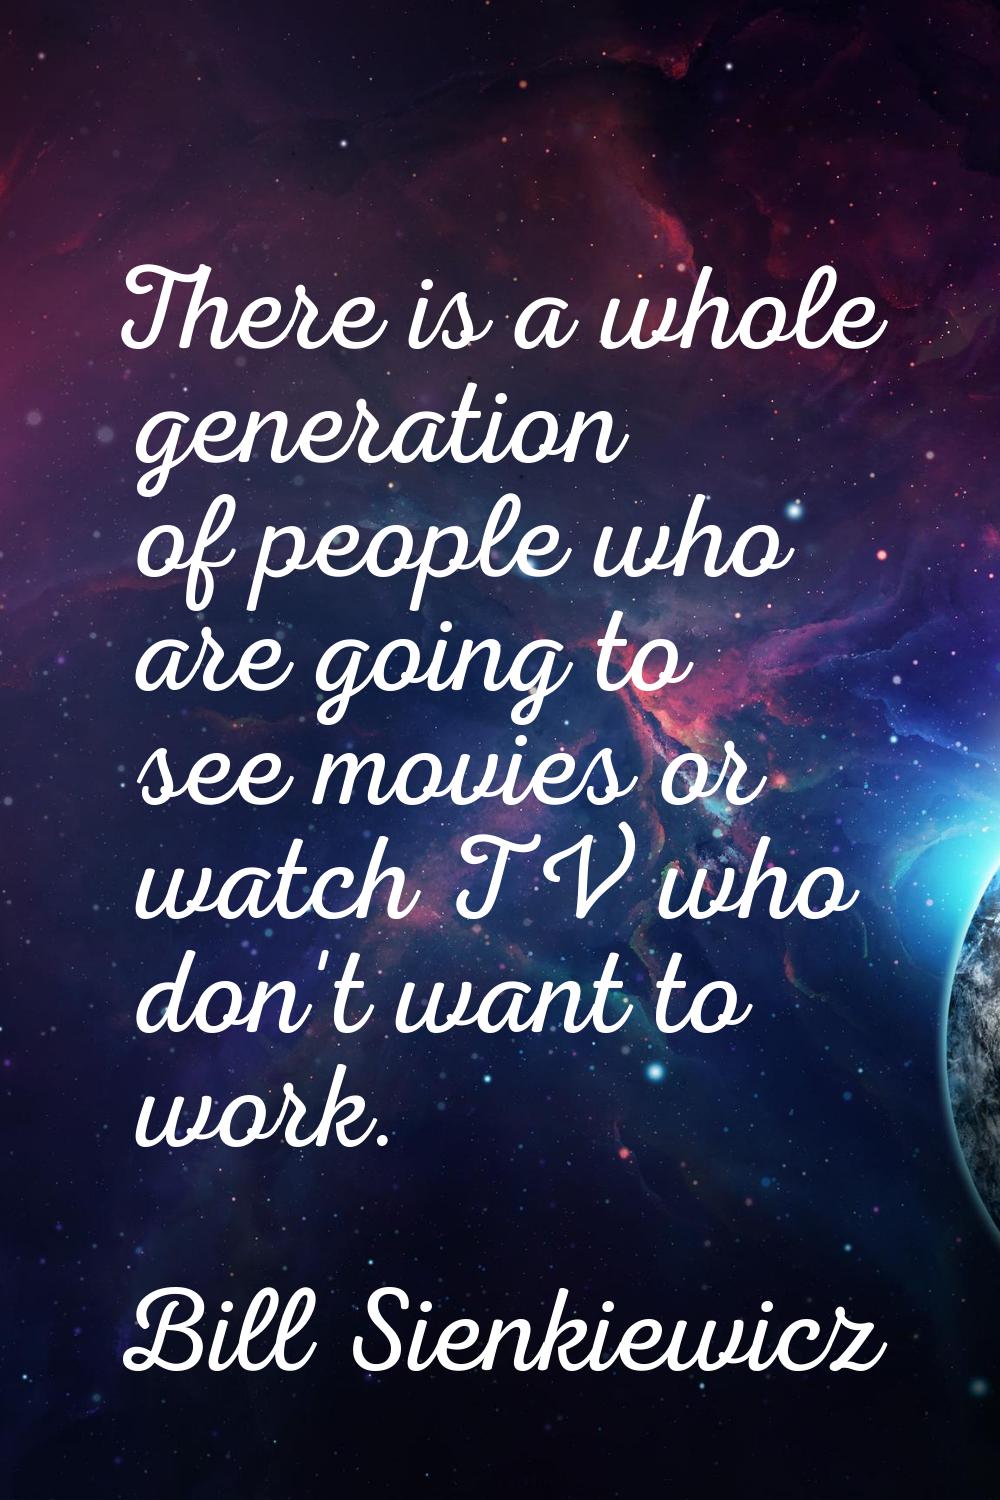 There is a whole generation of people who are going to see movies or watch TV who don't want to wor